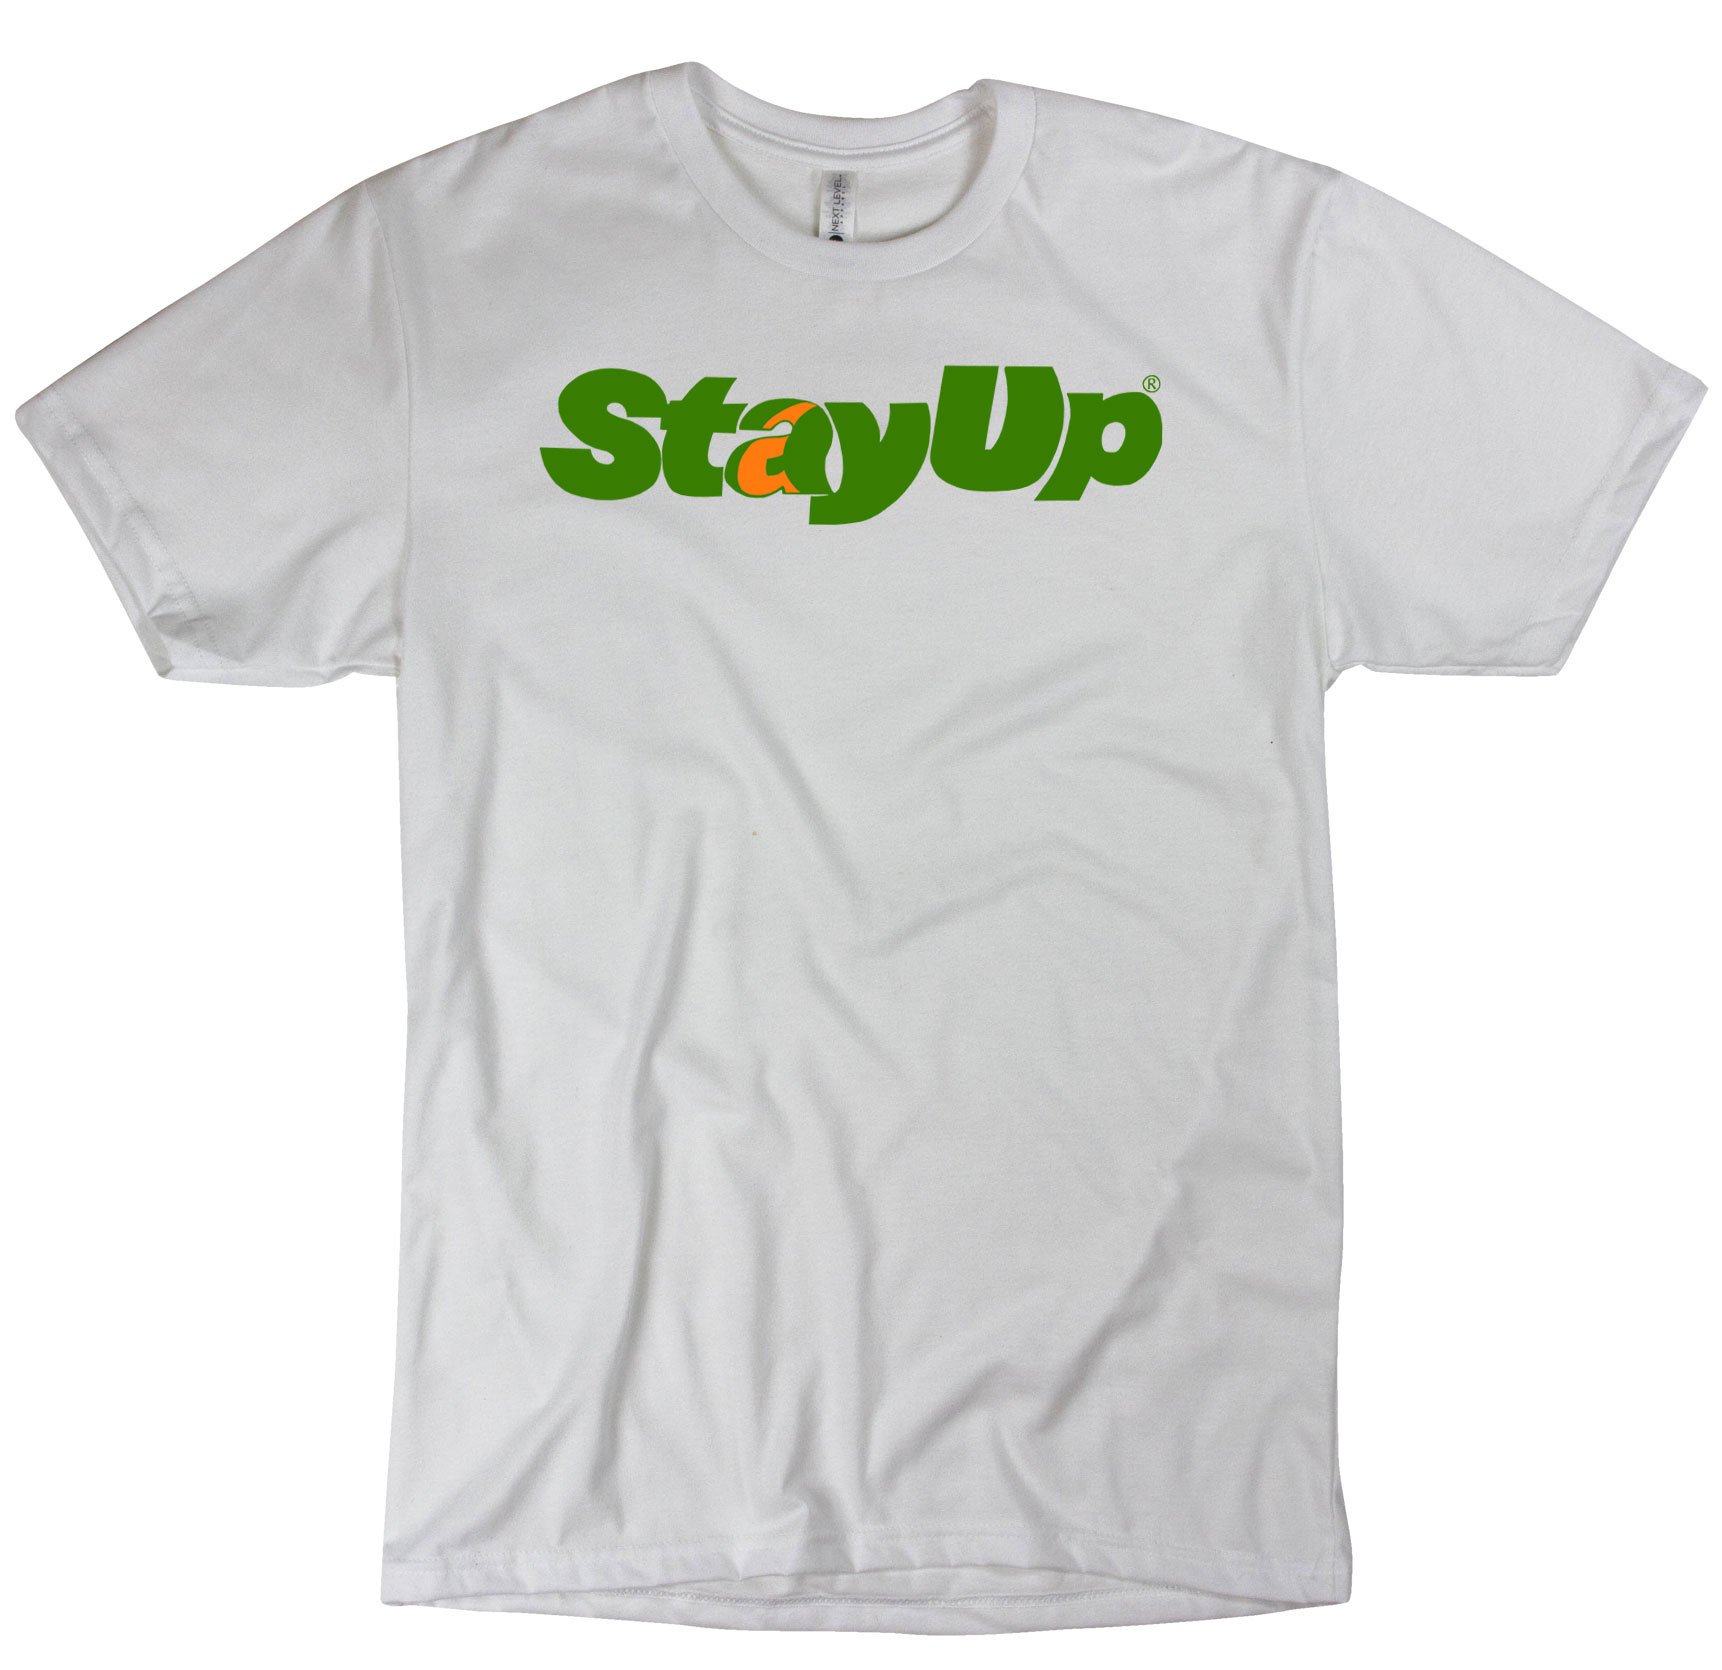 stay up racer t shirt